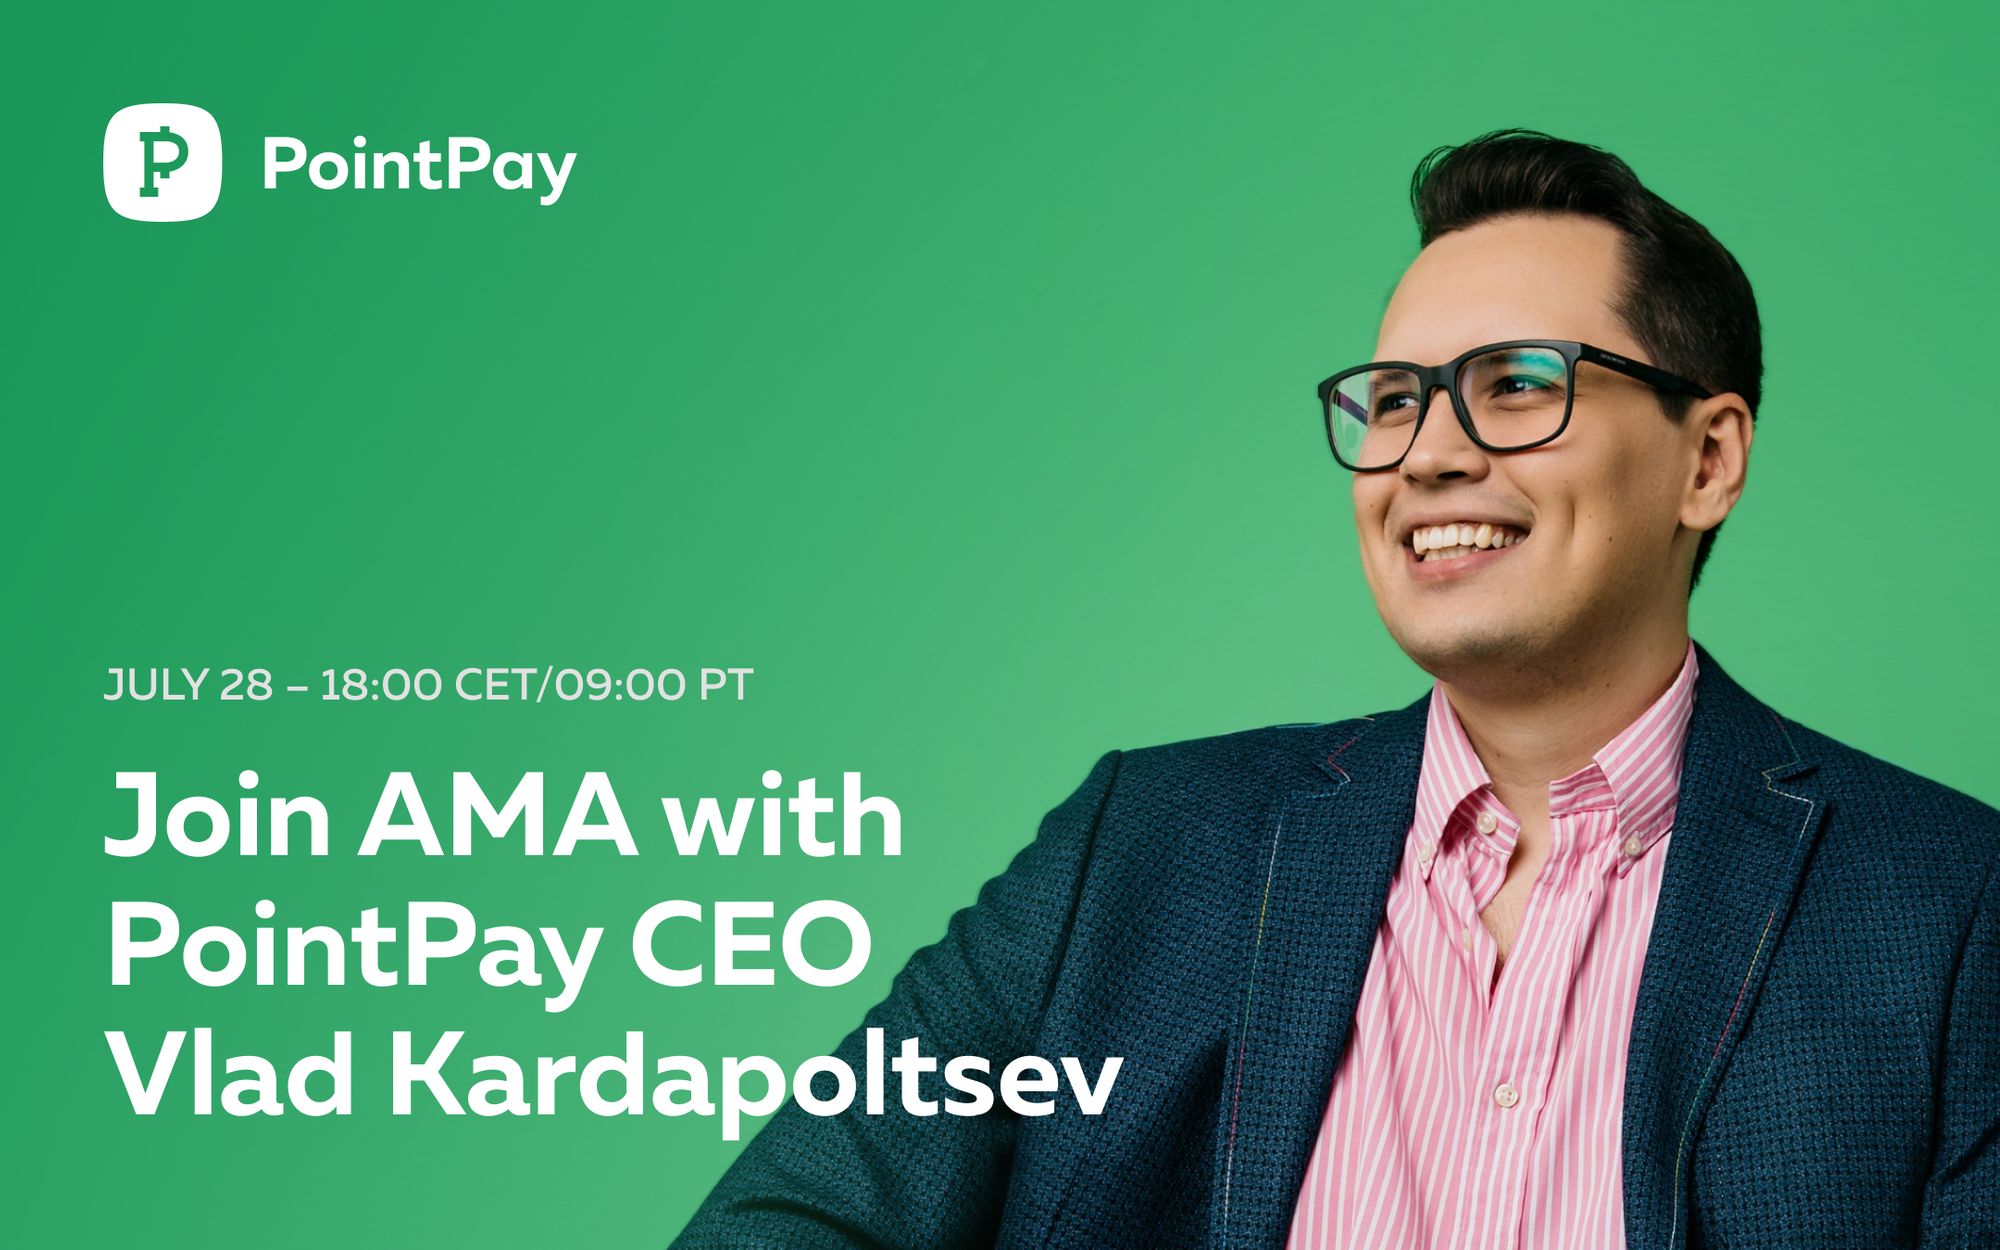 Join AMA with PointPay CEO Vladimir Kardapoltsev on the 28th of July 2022 (18:00 CET time)